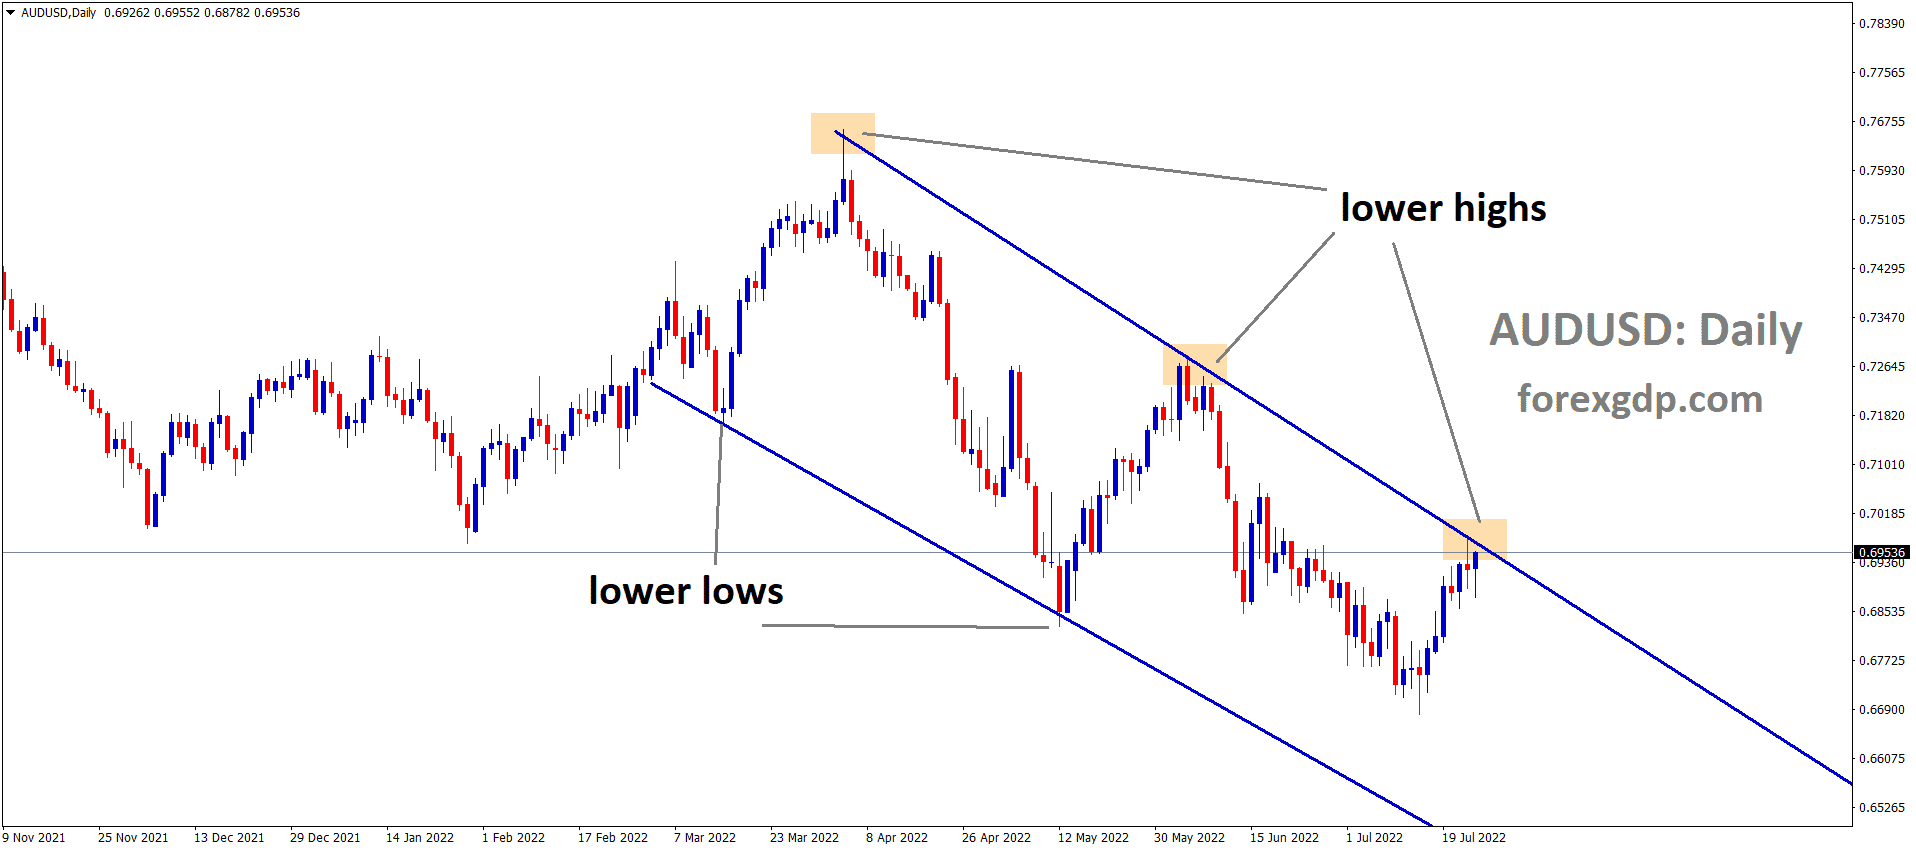 AUDUSD is moving in the Descending channel and the Market has reached the Lower high area of the channel